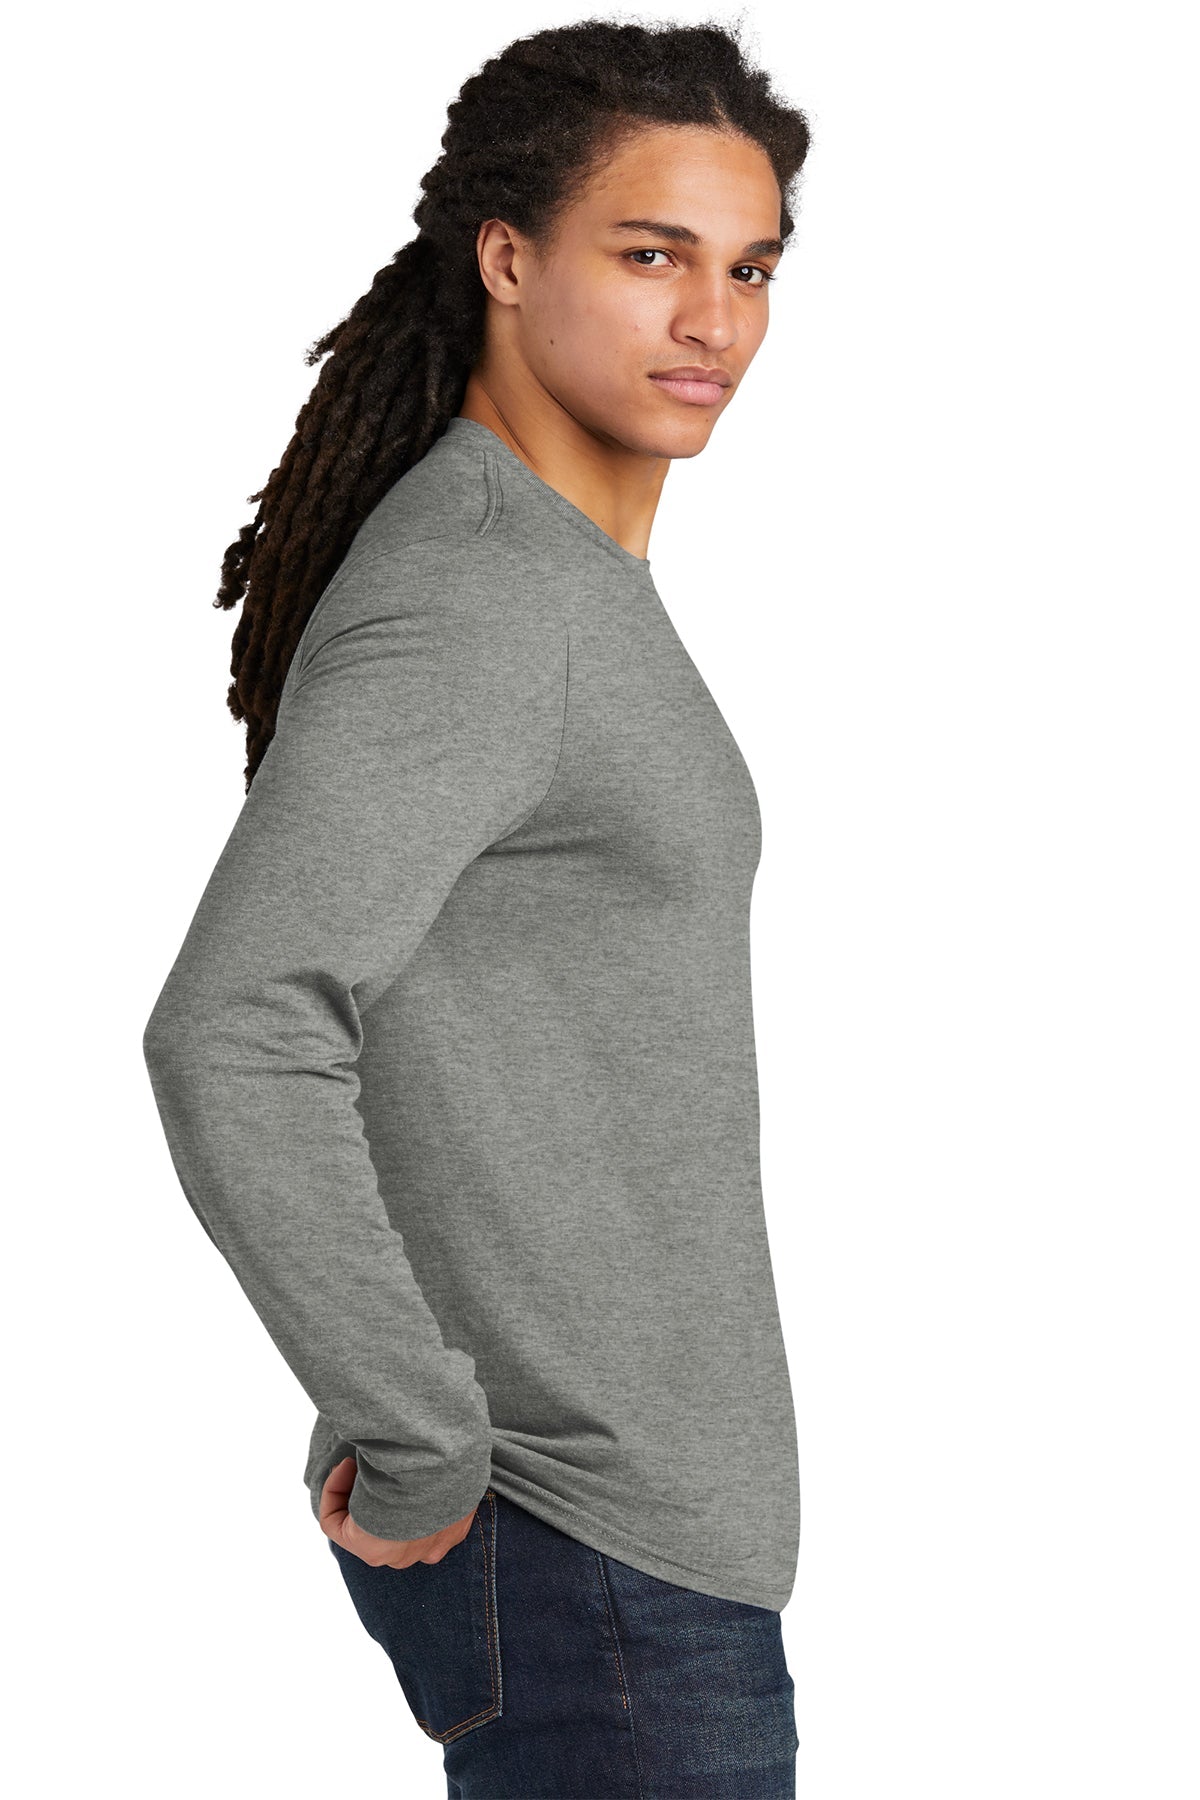 District Made Mens Perfect Tri Long Sleeve Crew Tee